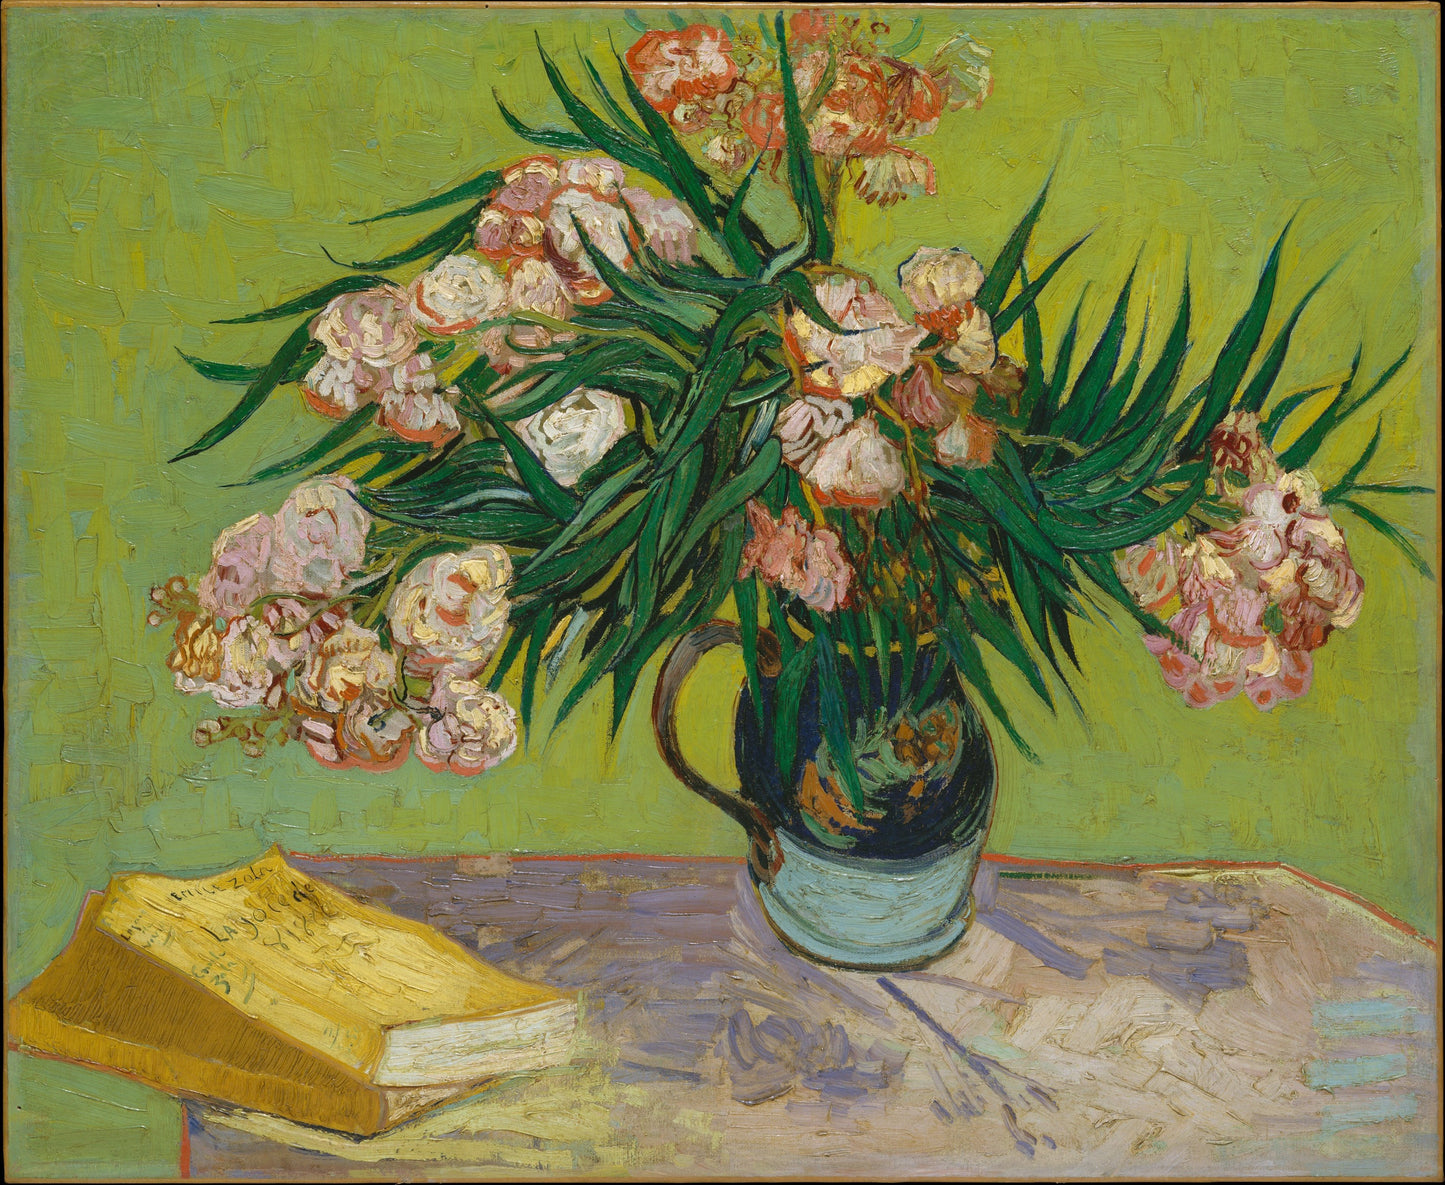 Majolica Jar with Branches of Oleander, 1888